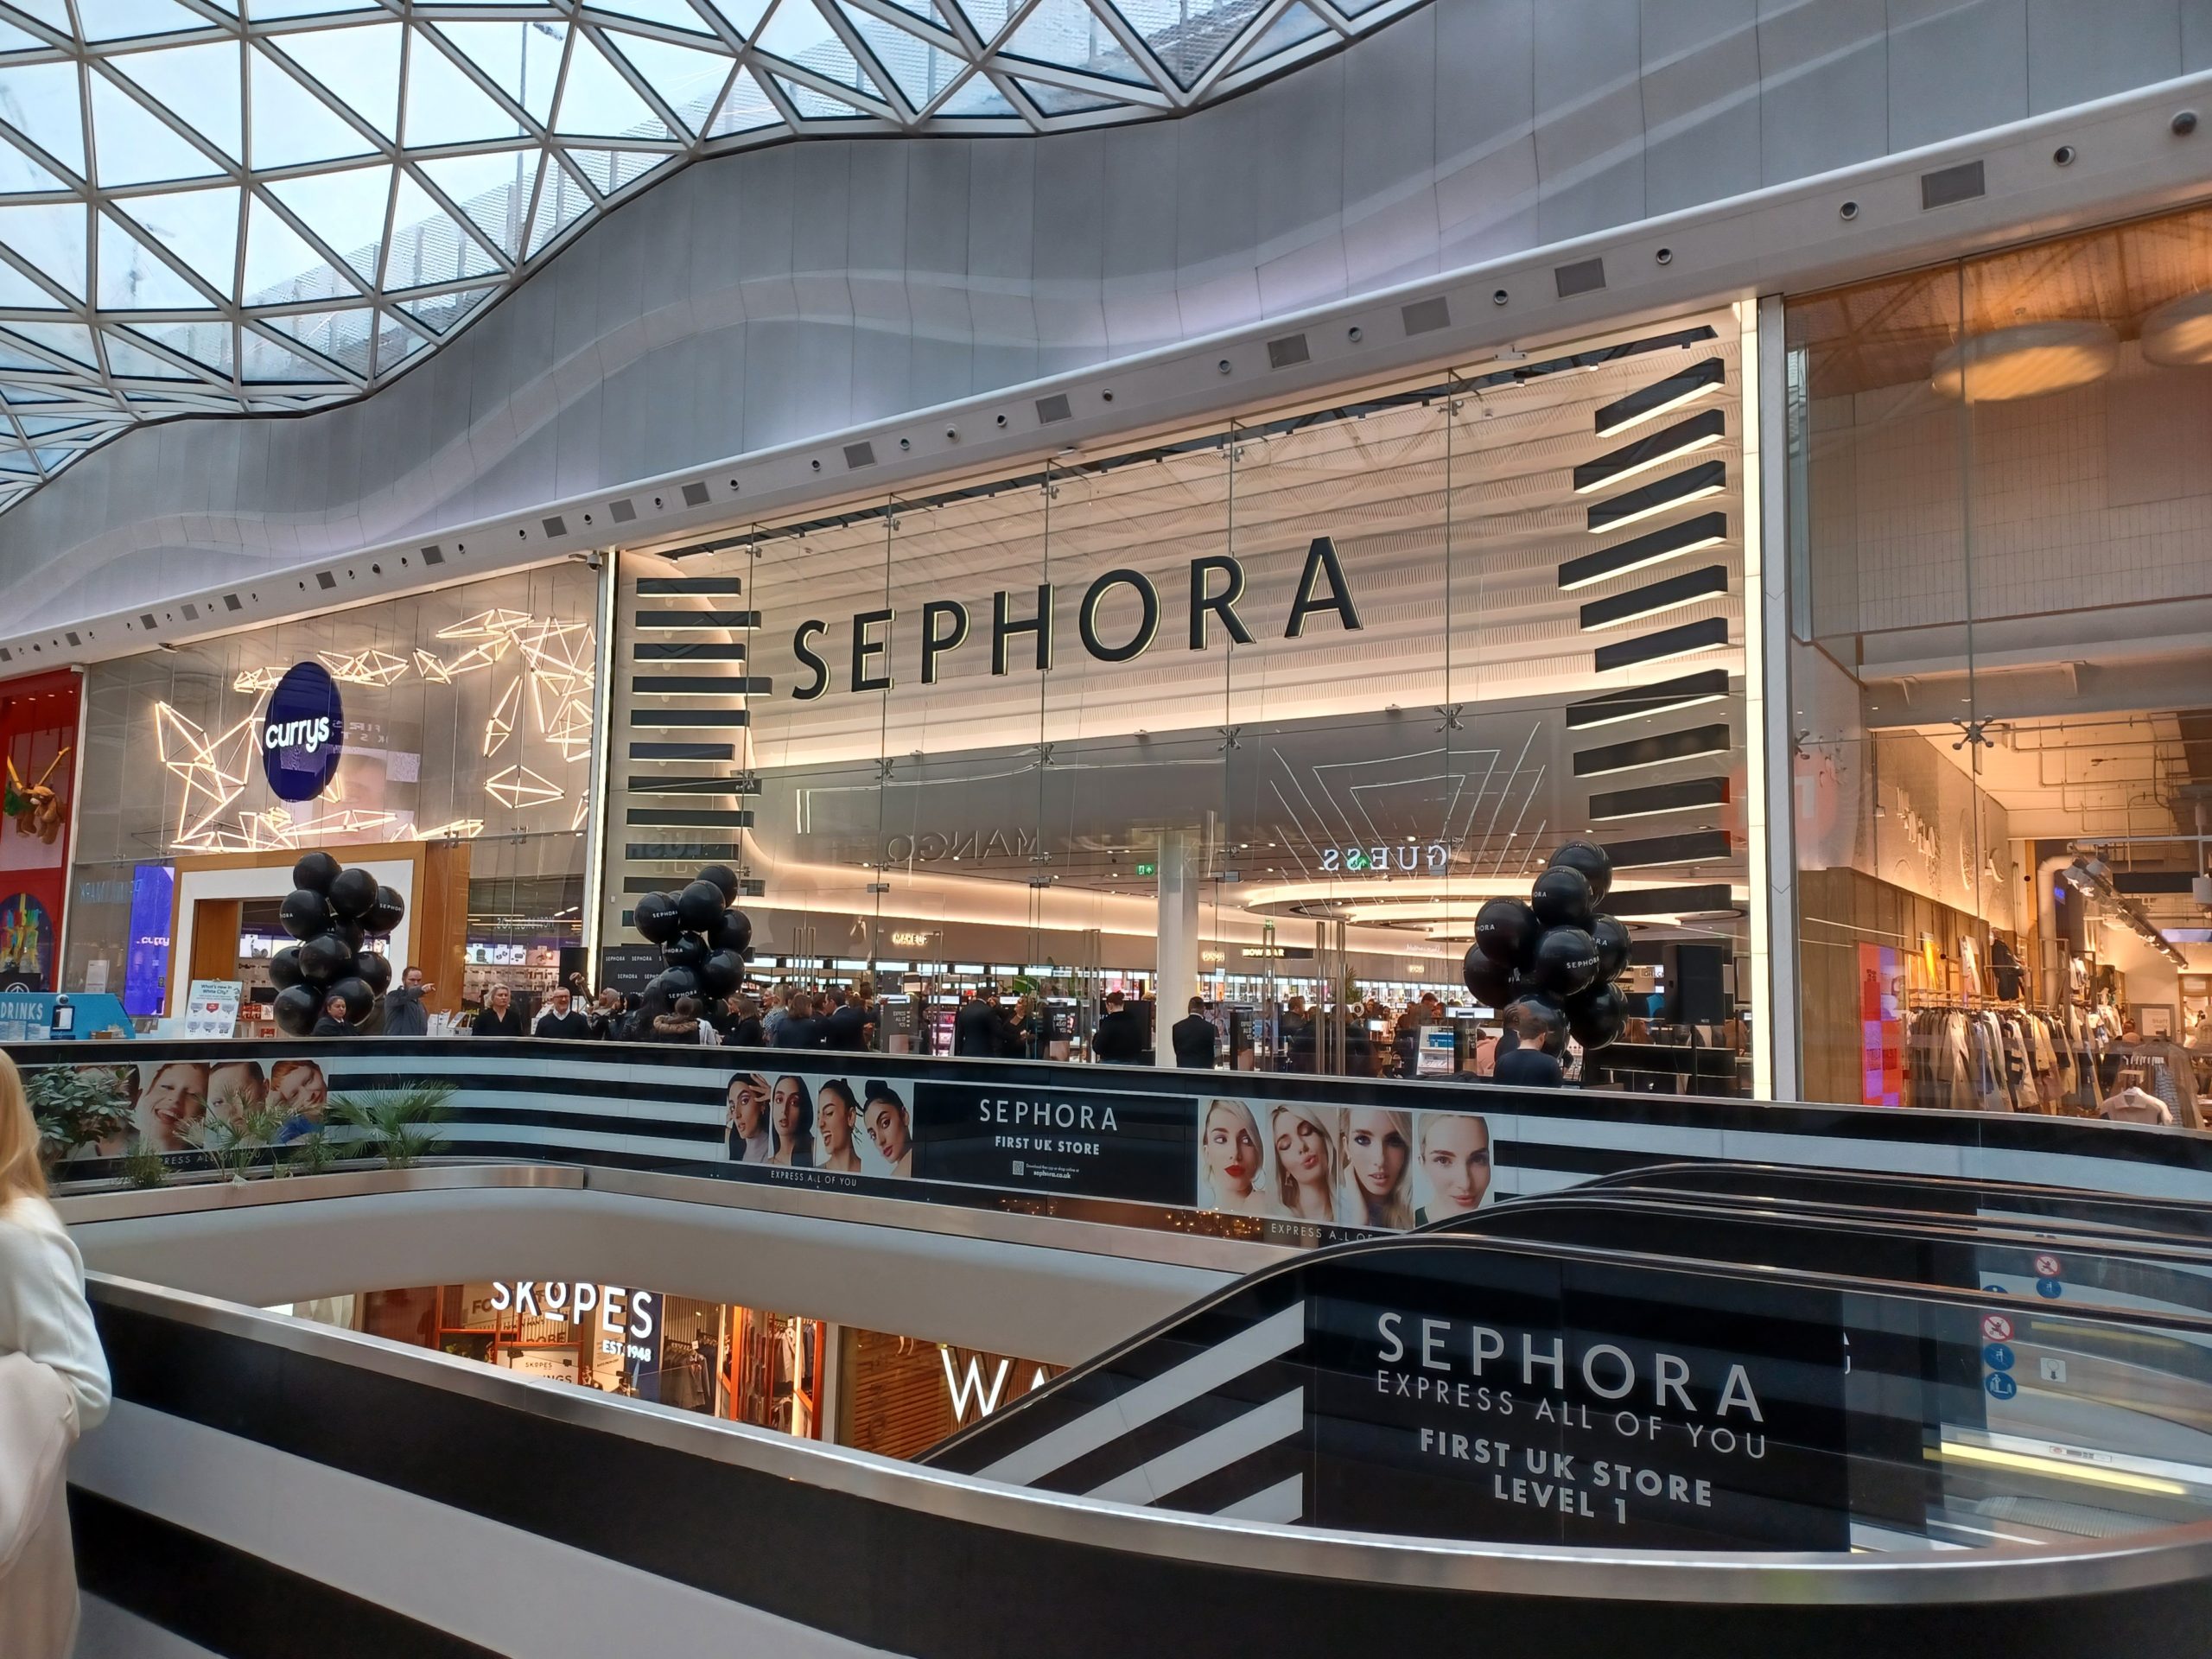 Sephora in the UK: A Matter of Timing